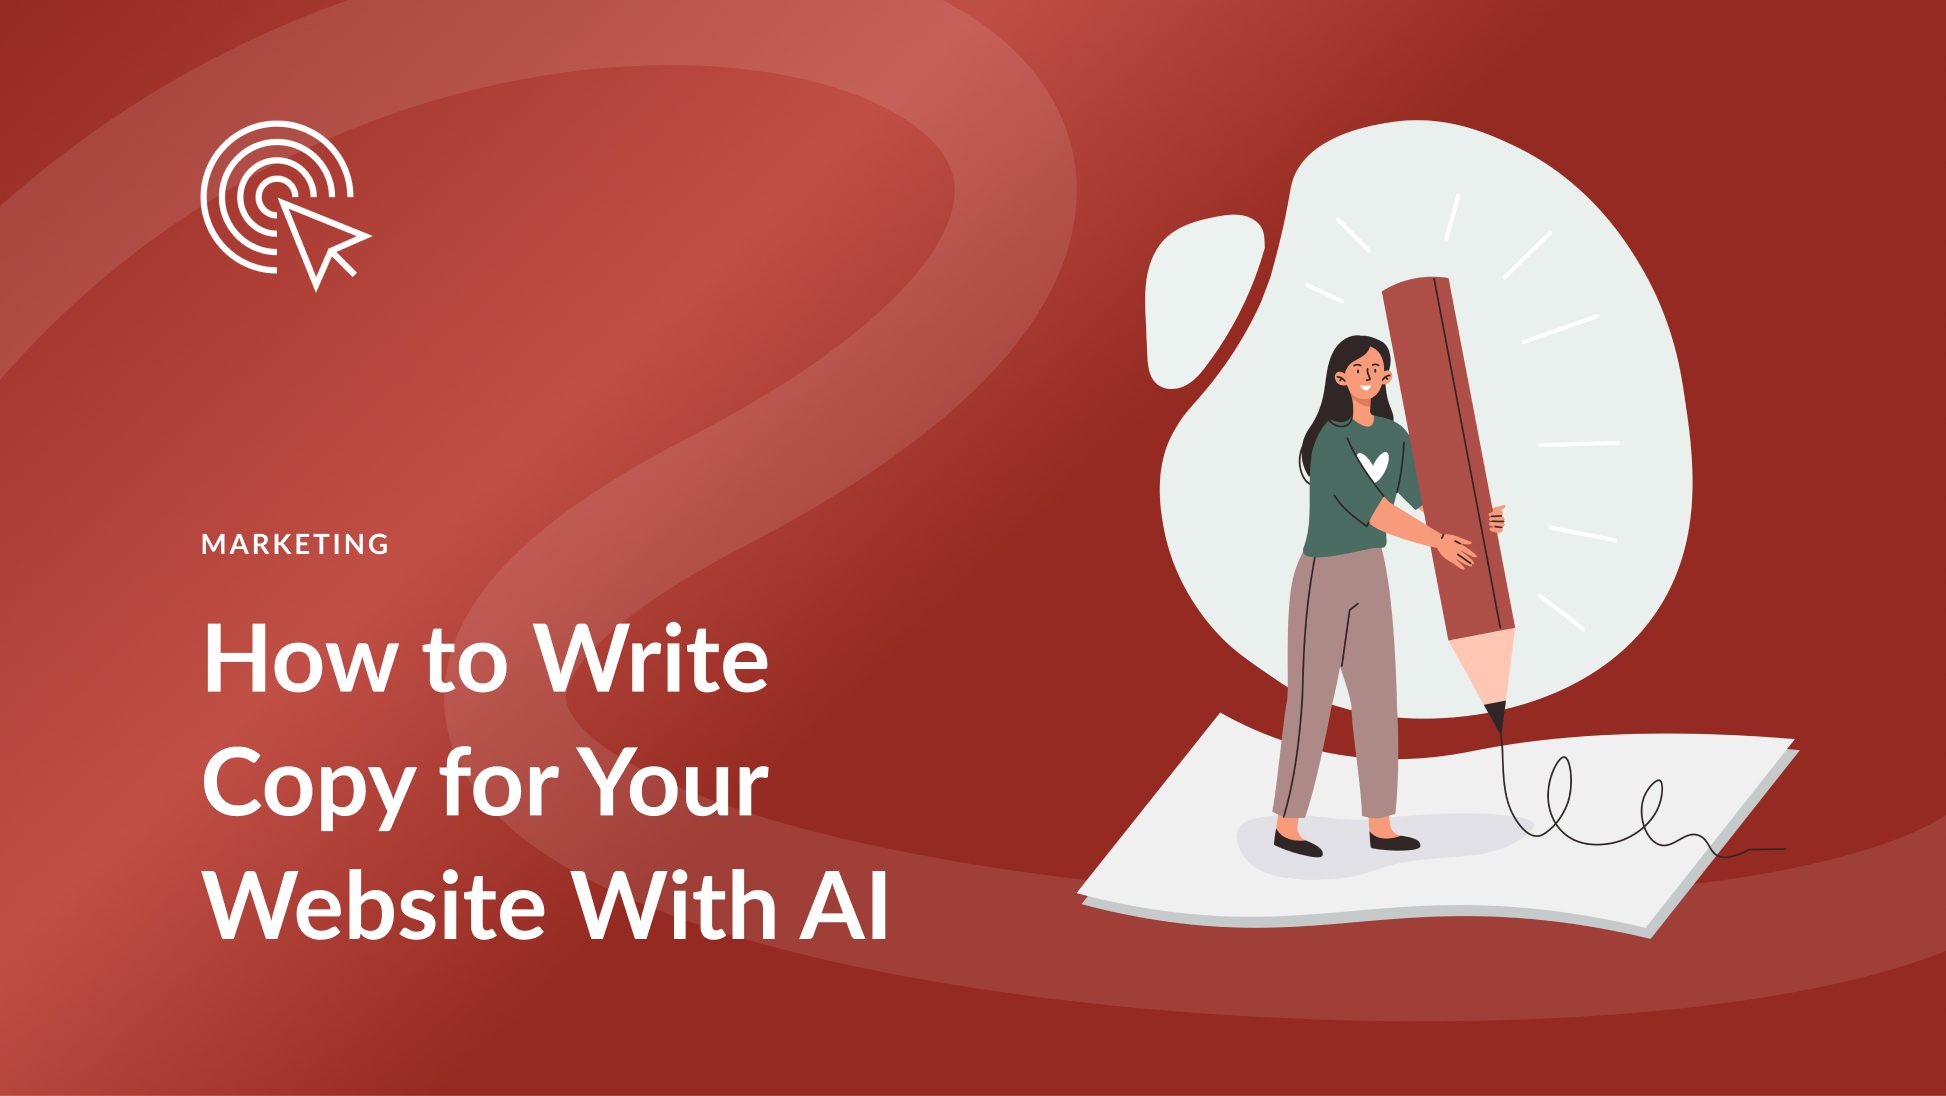 How to Write Copy for Your Website With AI